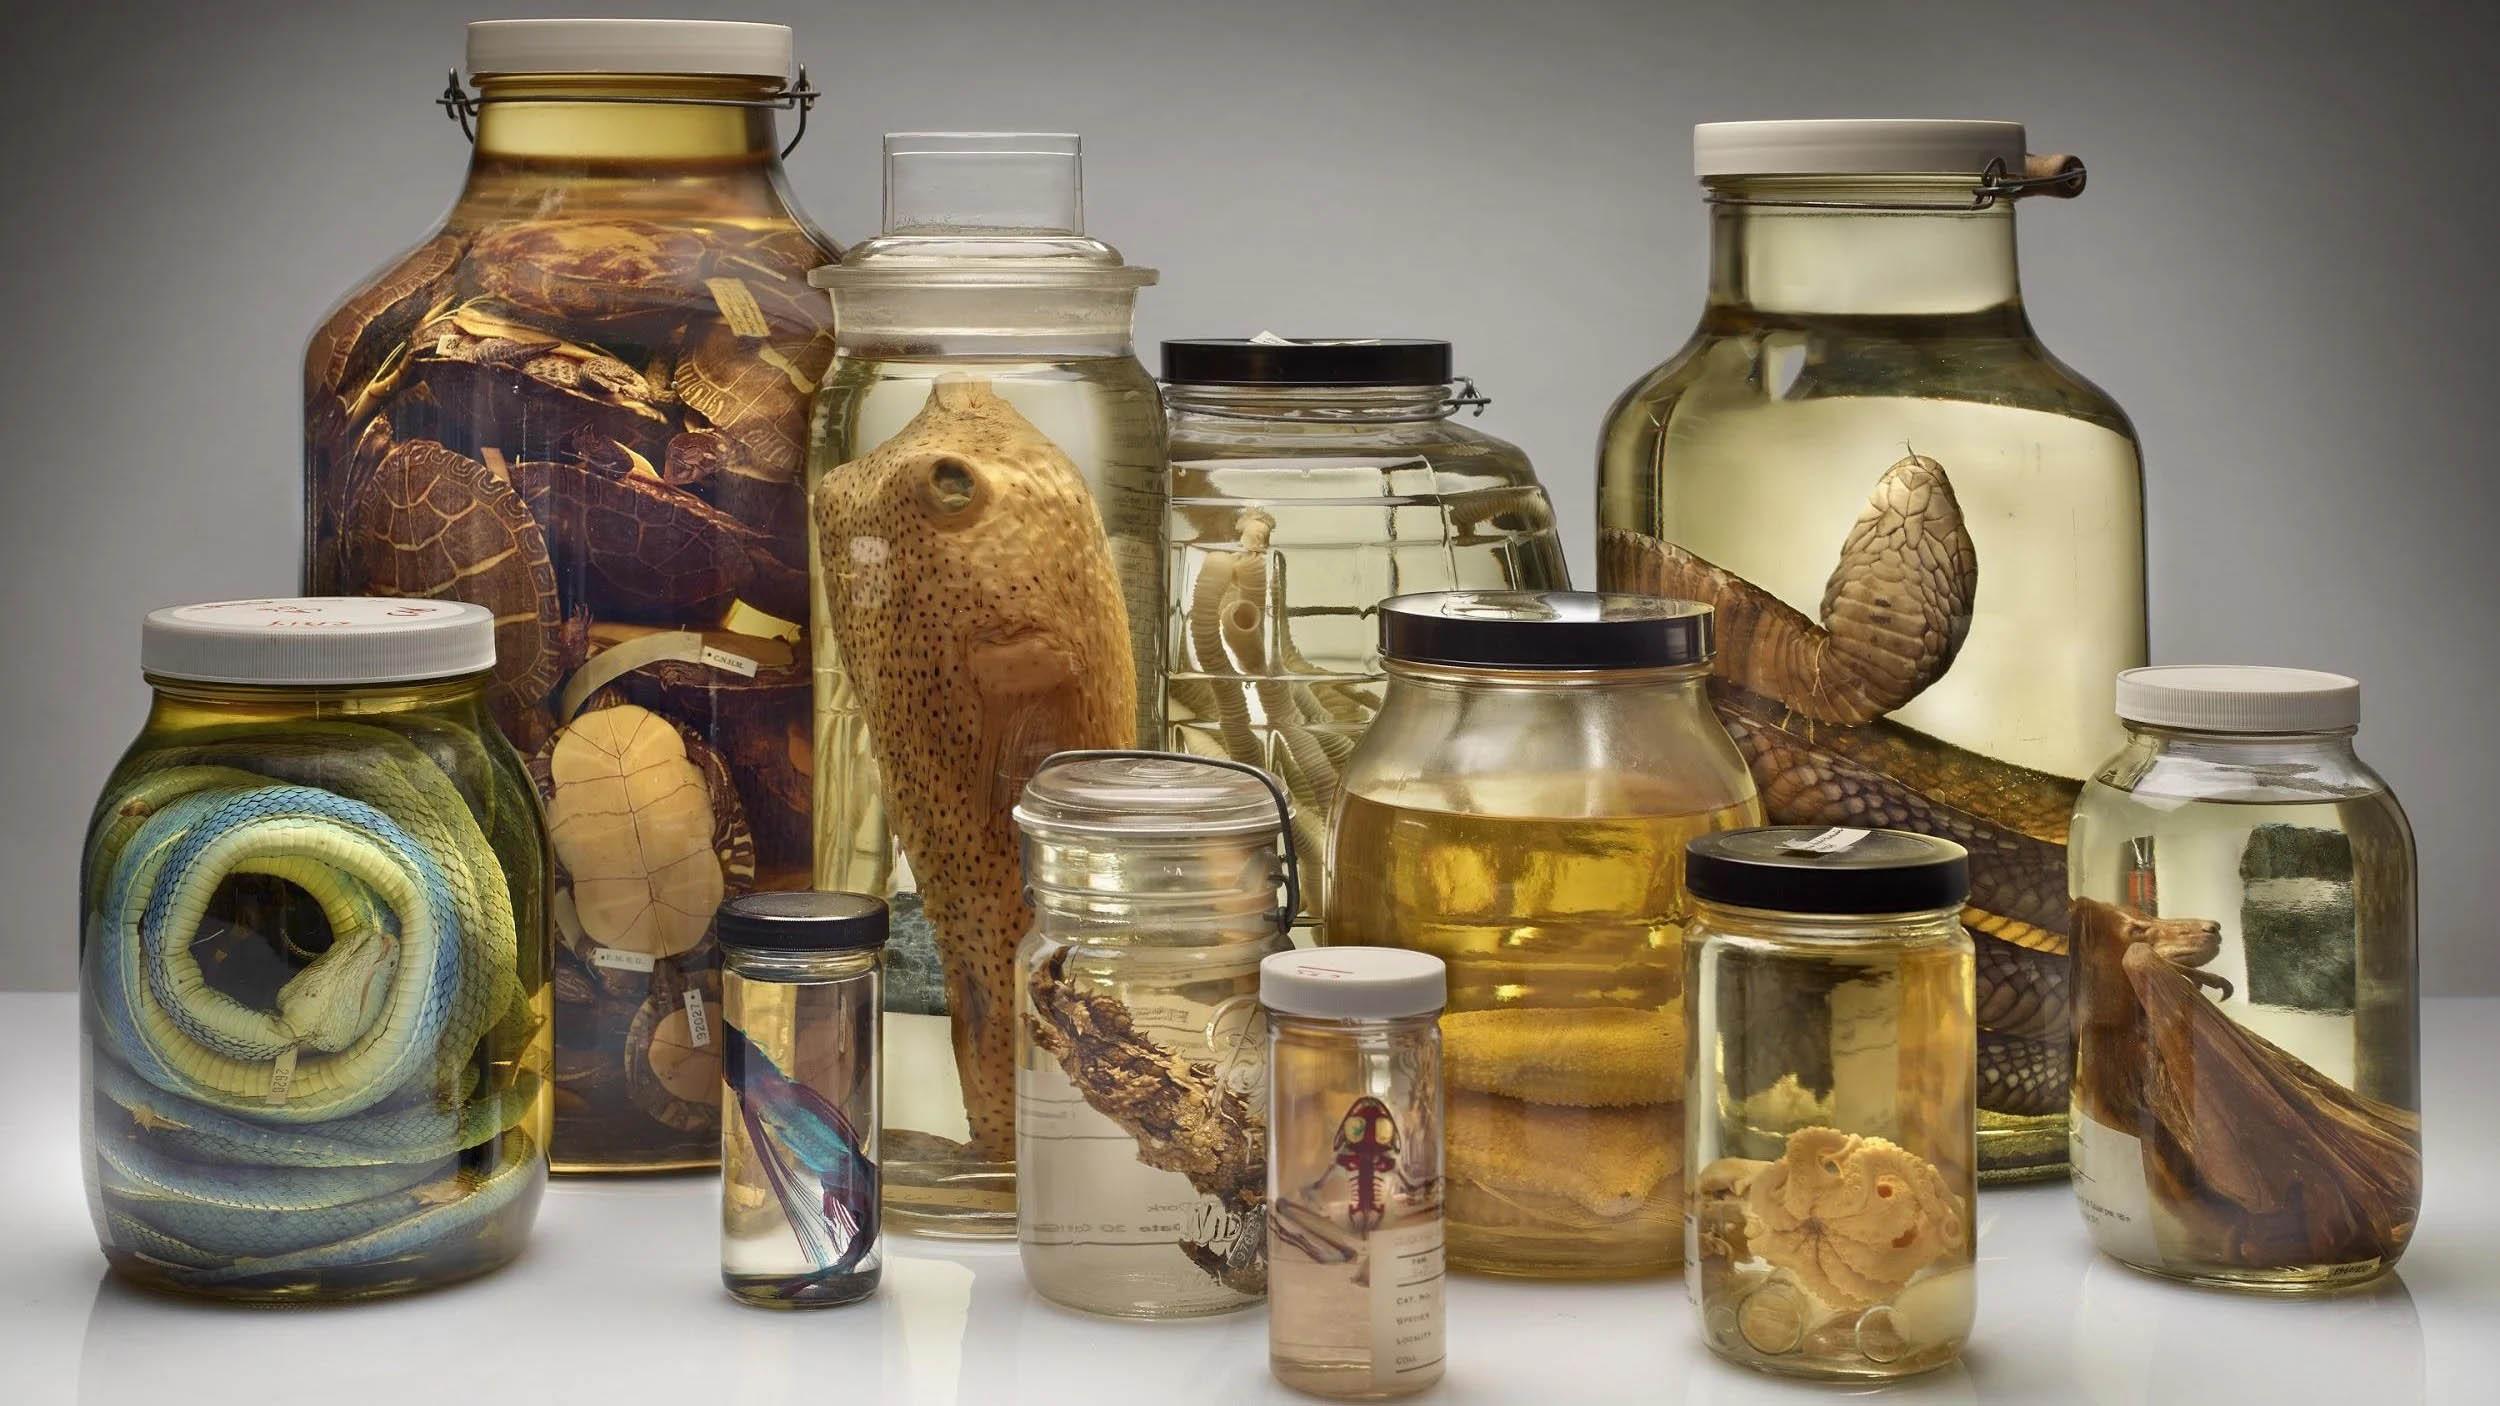 Specimen labels need to be digitized in order to increase access to the information they contain. (Courtesy of the Field Museum)